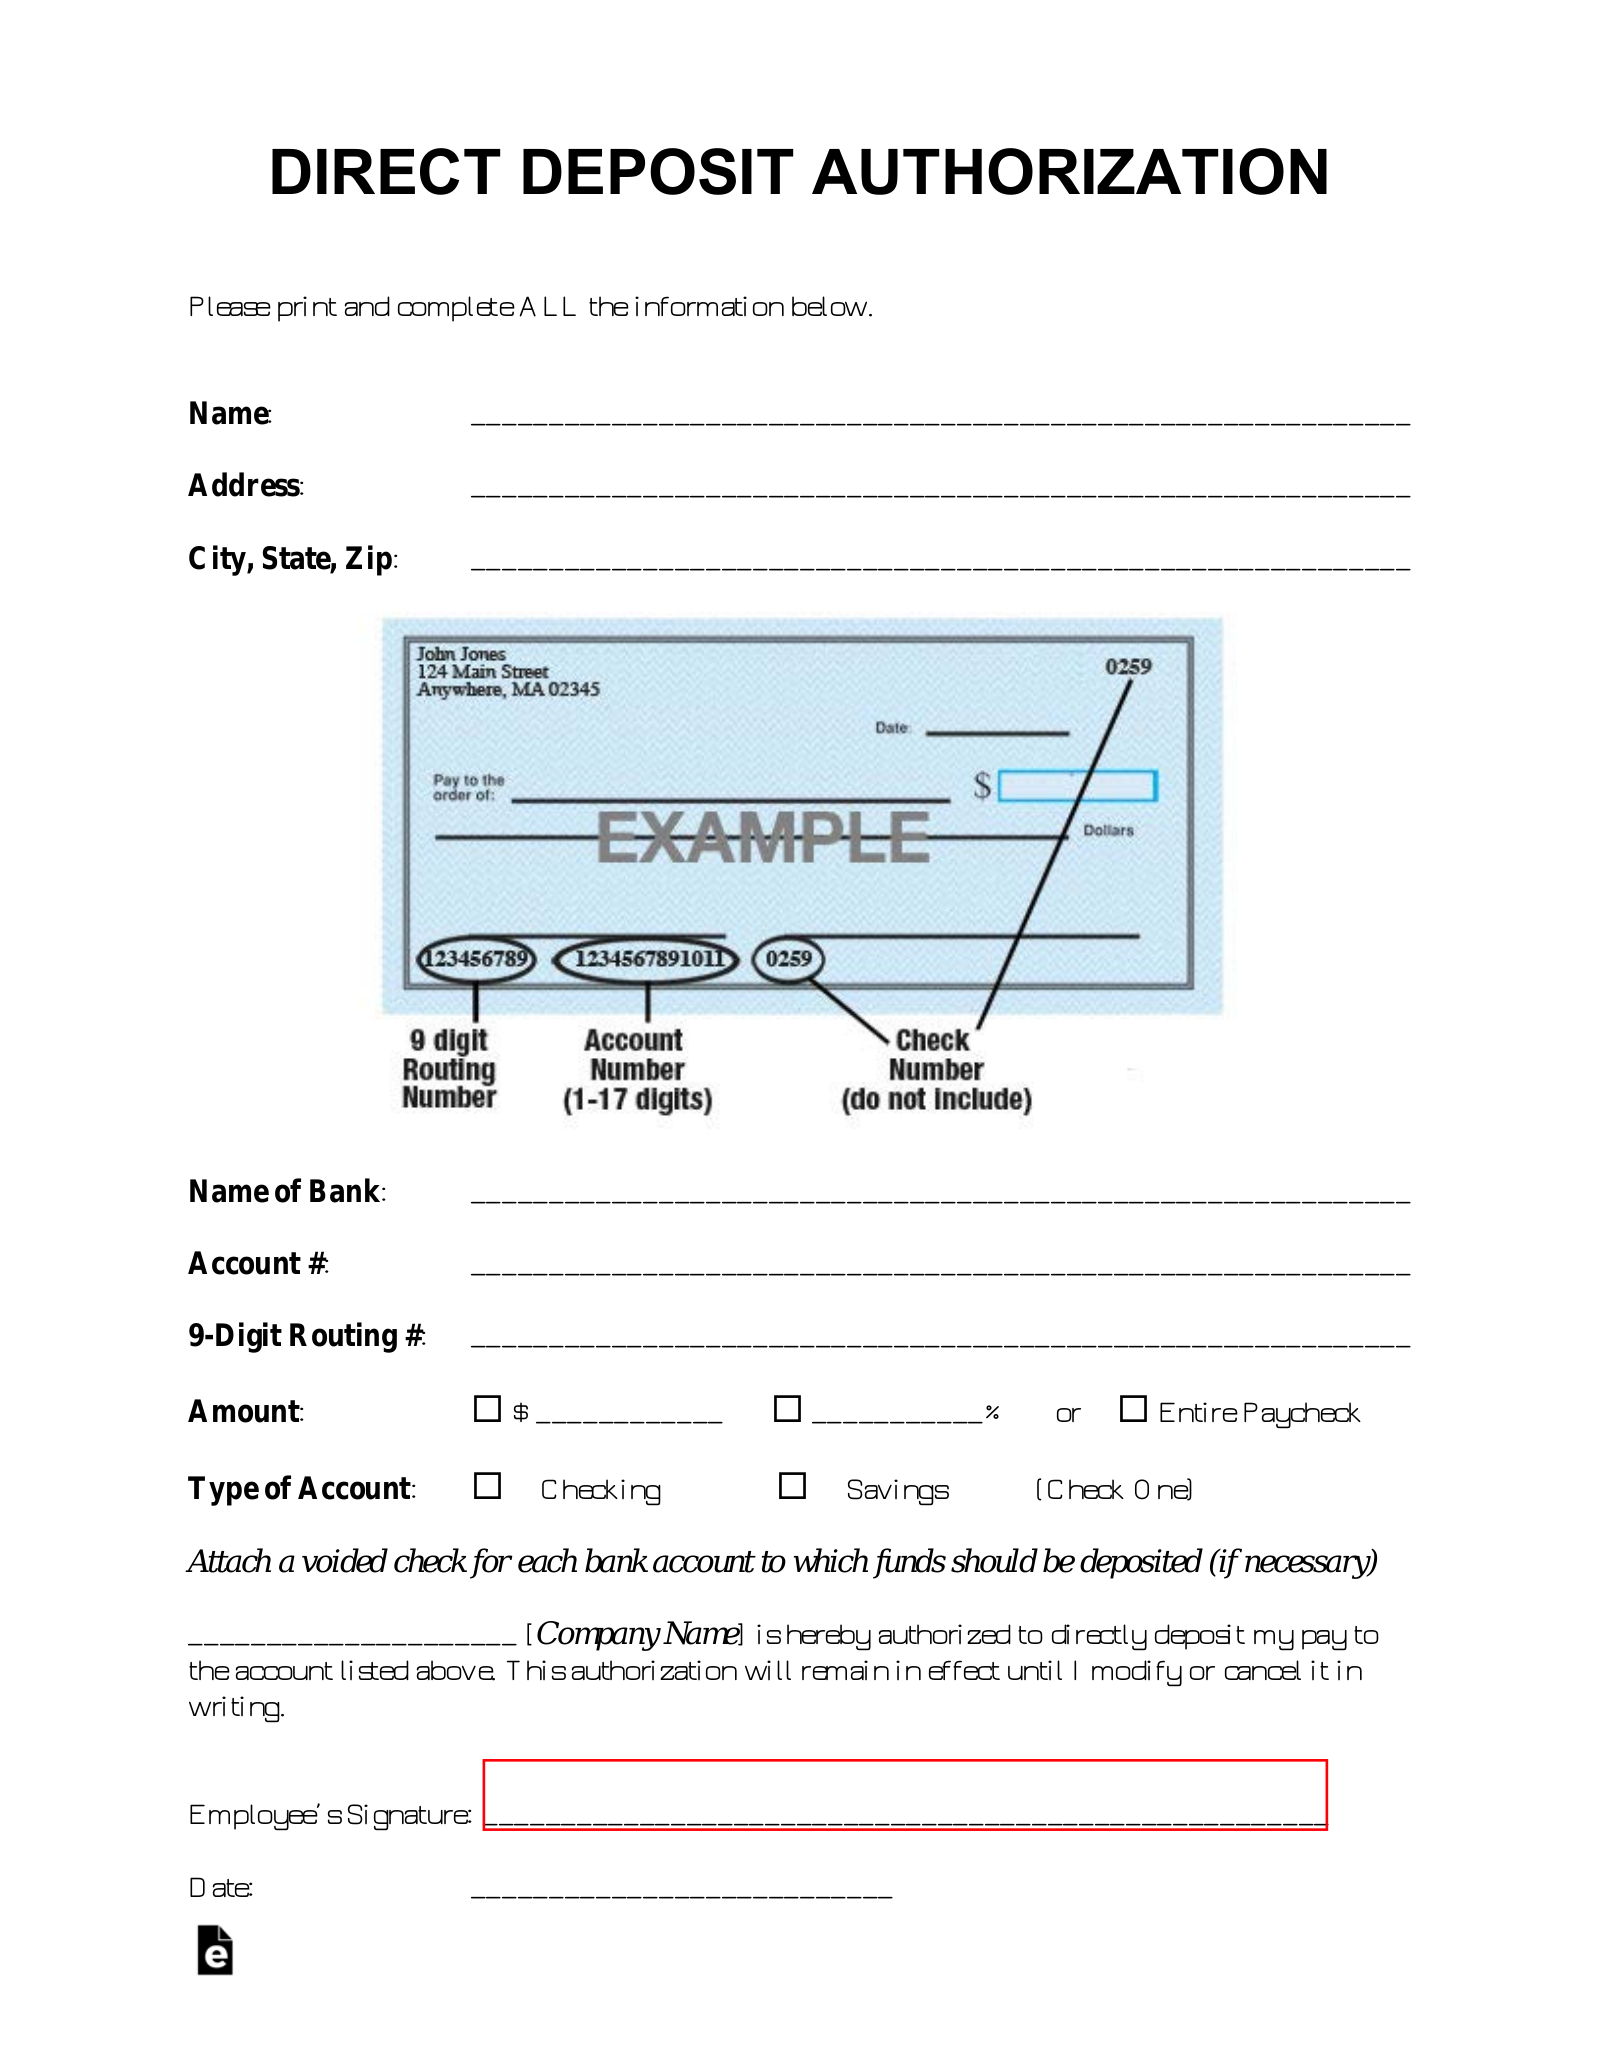 Free Direct Deposit Authorization Forms - PDF  Word – eForms With Authorization Agreement For Direct Deposit Inside Authorization Agreement For Direct Deposit